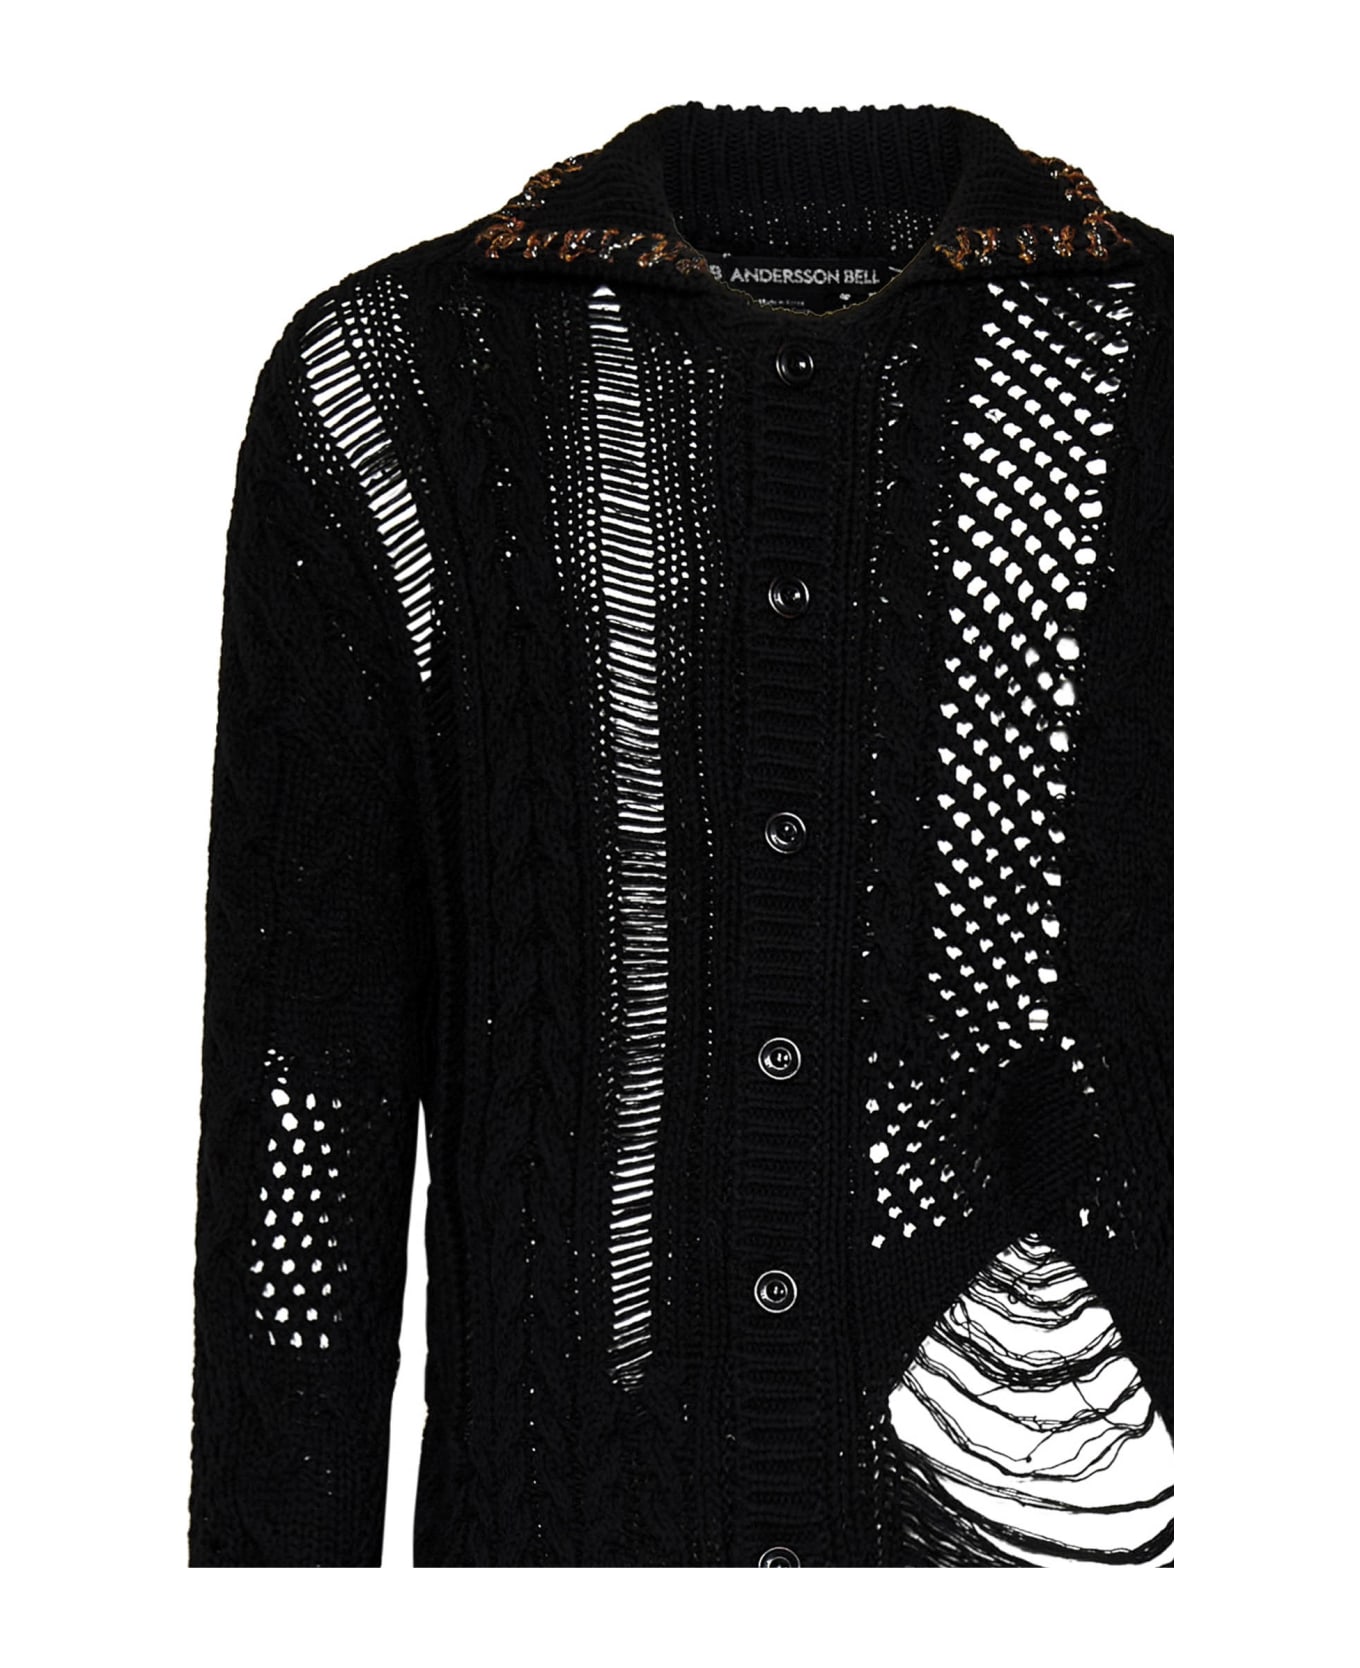 Andersson Bell Cardigan - Black